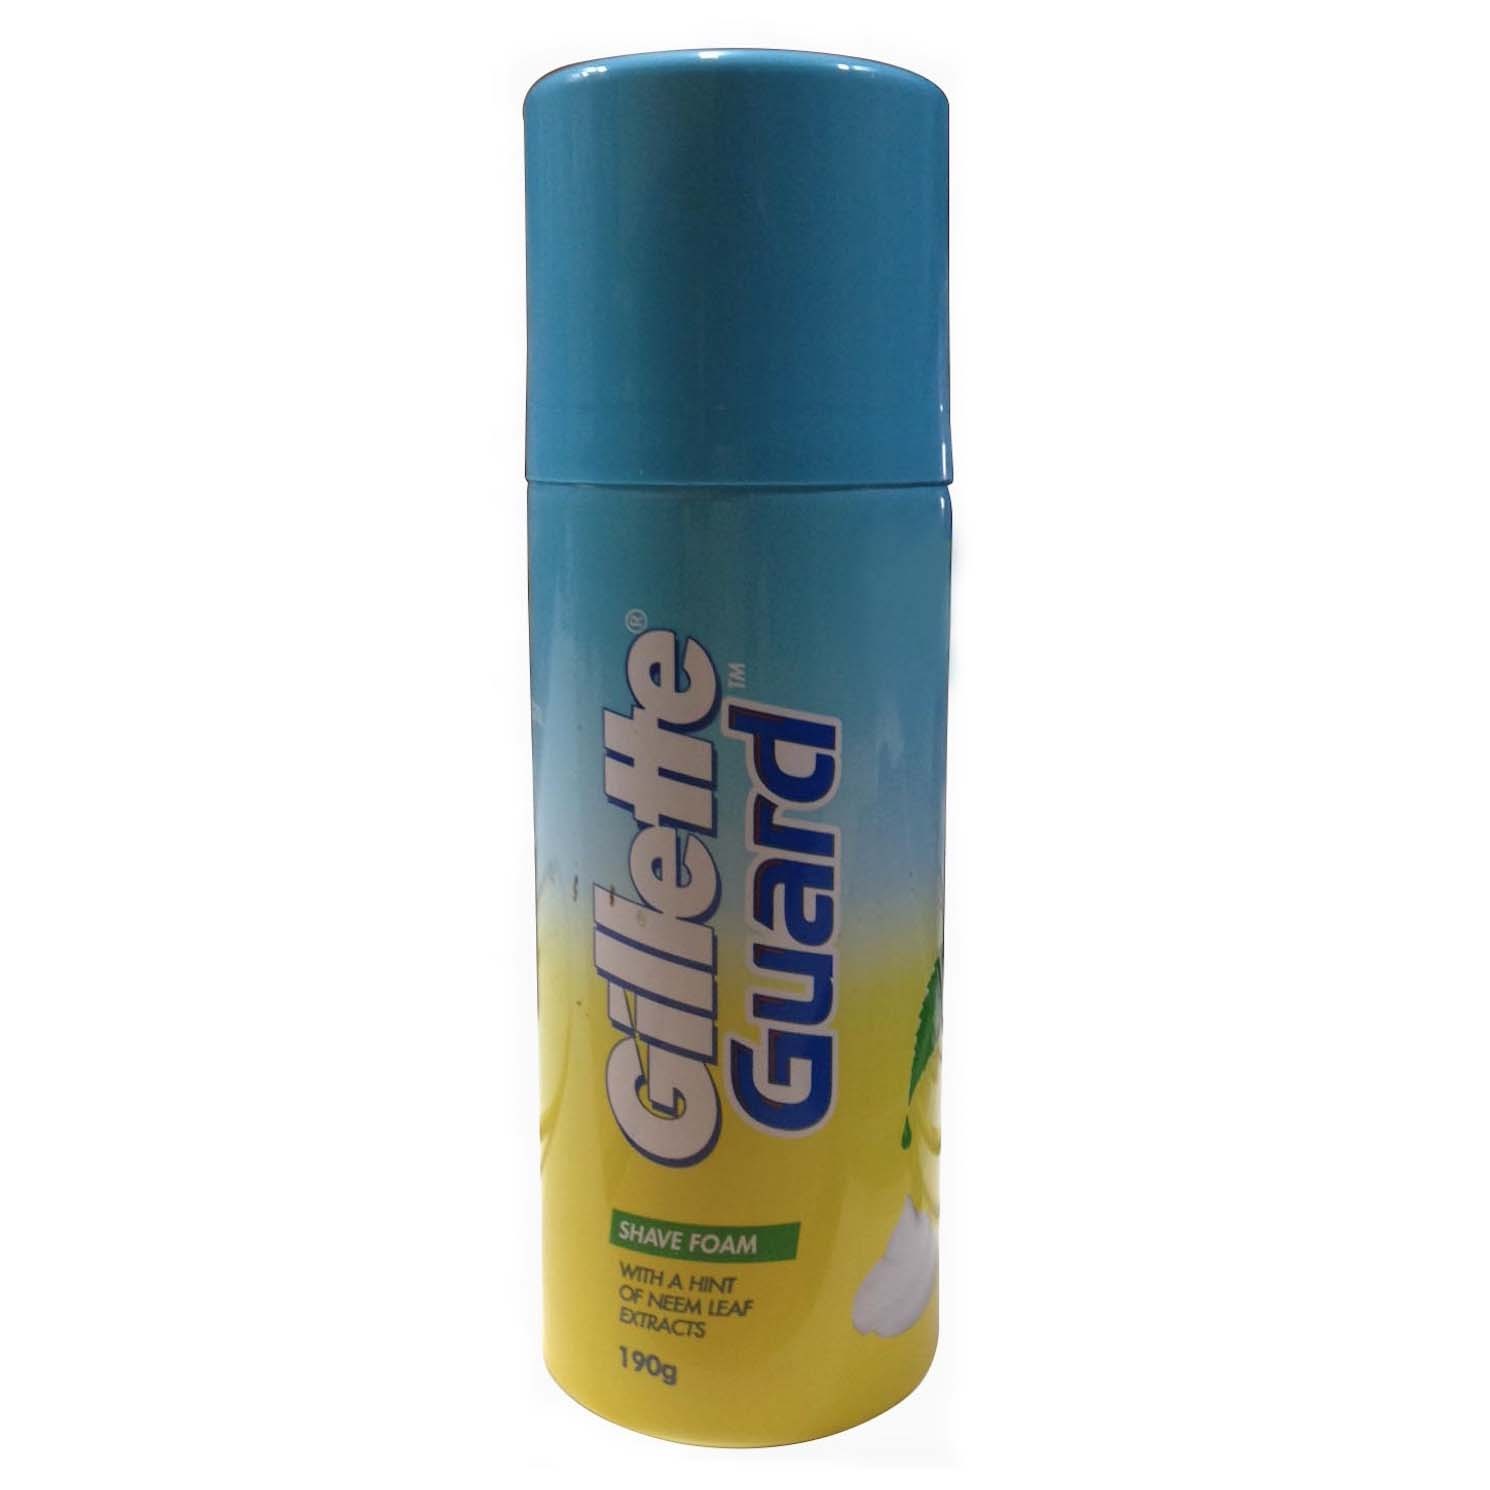 Gillette Shave Foam - CAN of 190g - Guard - Neem Leaf Extracts - P/C - 3042